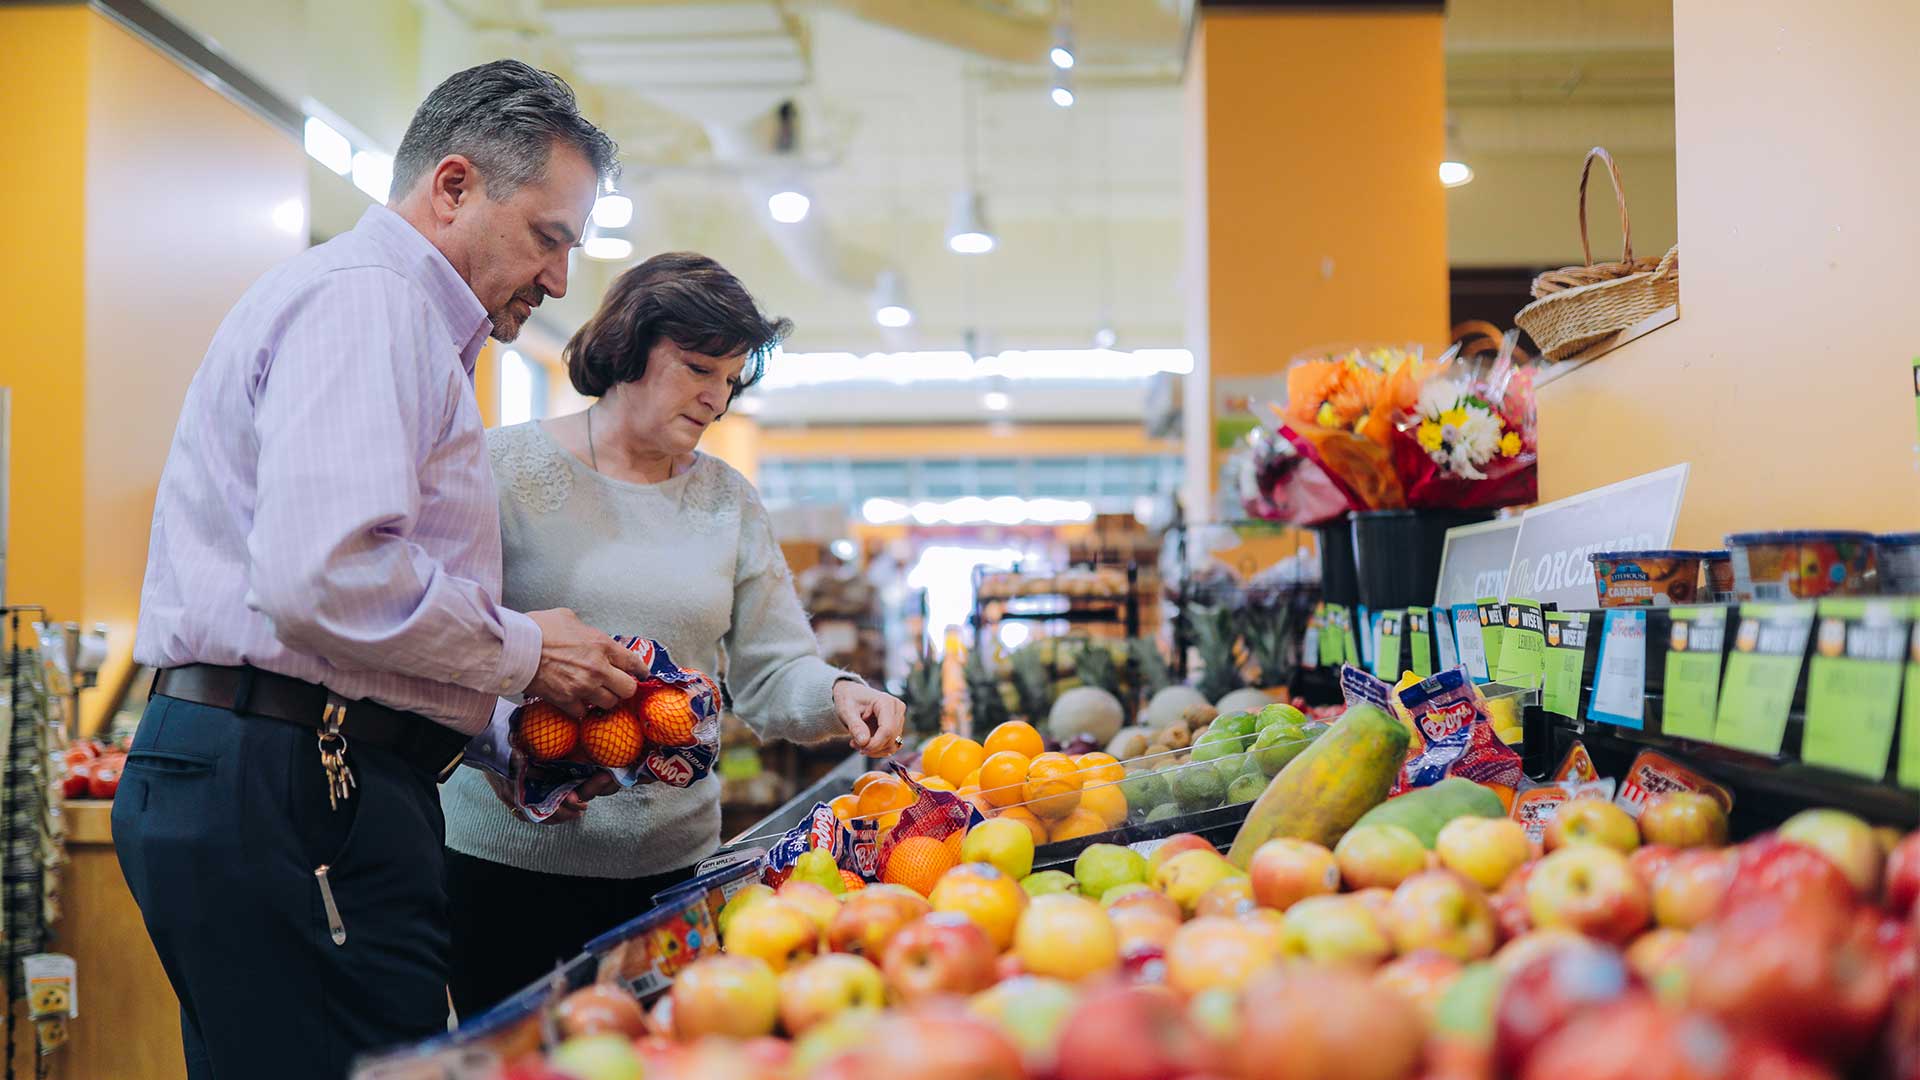 People looking at produce at Wohlner's Grocery